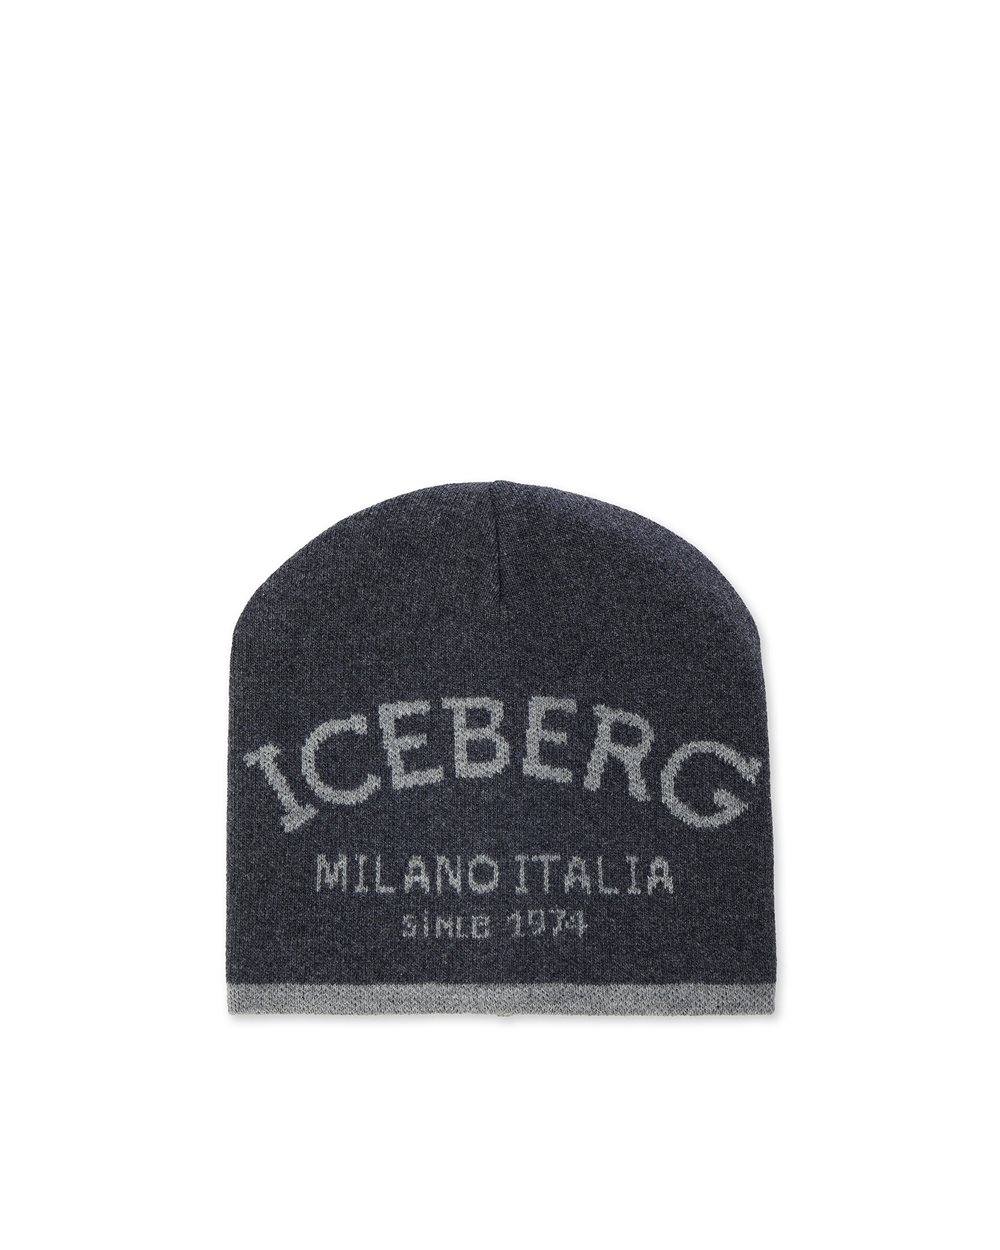 Knitted hat with jacquard workmanship - carosello HP woman accessories | Iceberg - Official Website